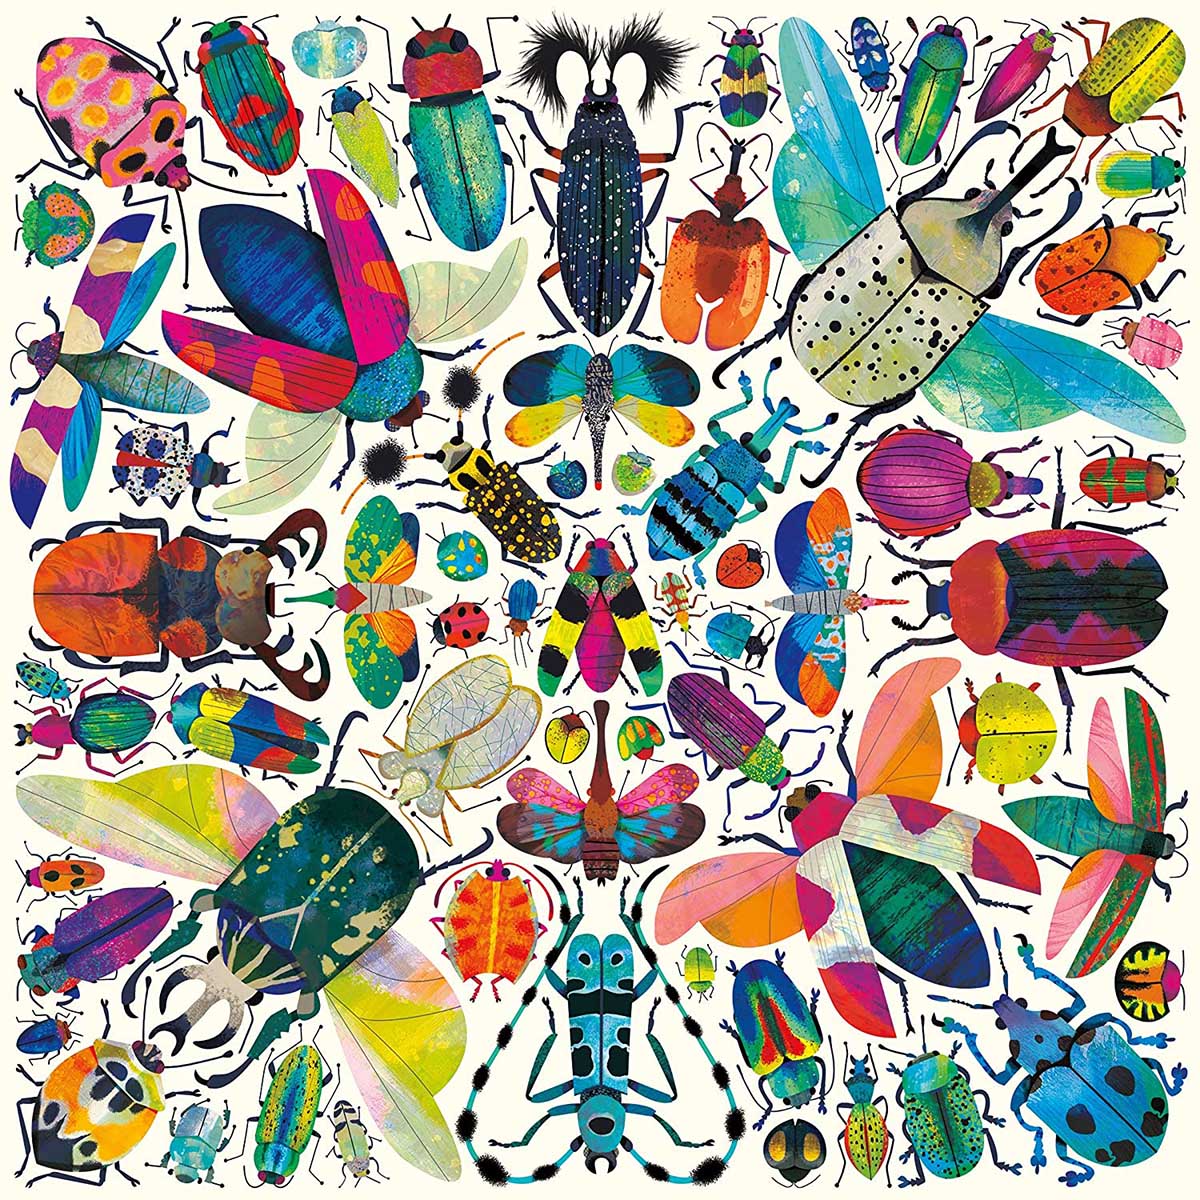 Kaleido Beetles Butterflies and Insects Jigsaw Puzzle